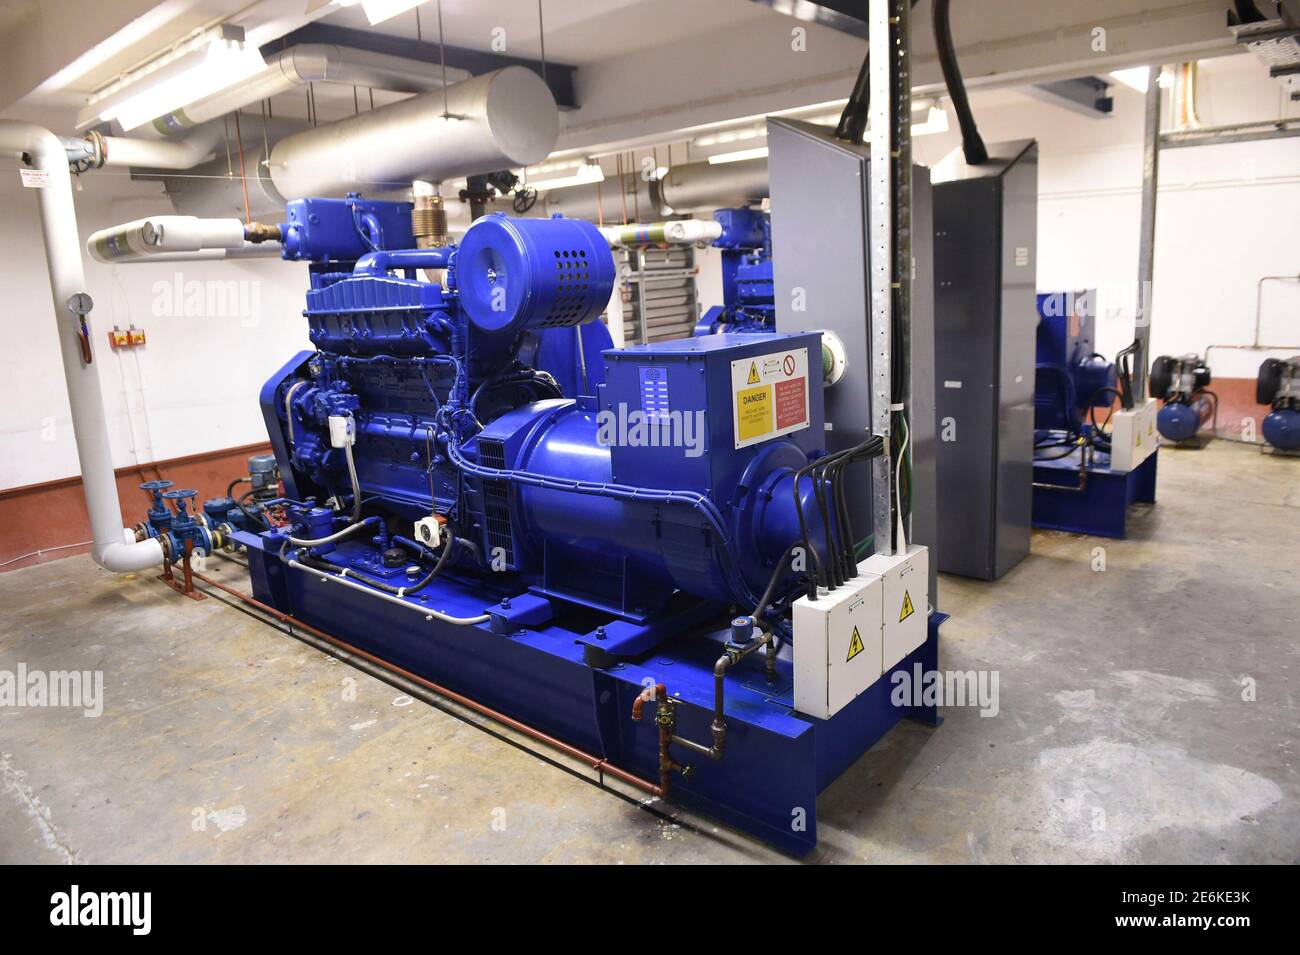 The generator room is seen in a former Regional Government HQ Nuclear bunker built by the British government during the Cold War which  has come up for sale in Ballymena, Northern Ireland on February 4, 2016. It is owned by the Office of Northern Ireland's First Minister and Deputy First Minister and capable of accommodating 236 personnel for extended periods. A large range of the original fixtures and fittings are to be included in the sale. It is believed to be one of the most technically advanced bunkers built in the UK with an array of advanced life support systems. In the event of a nucle Stock Photo